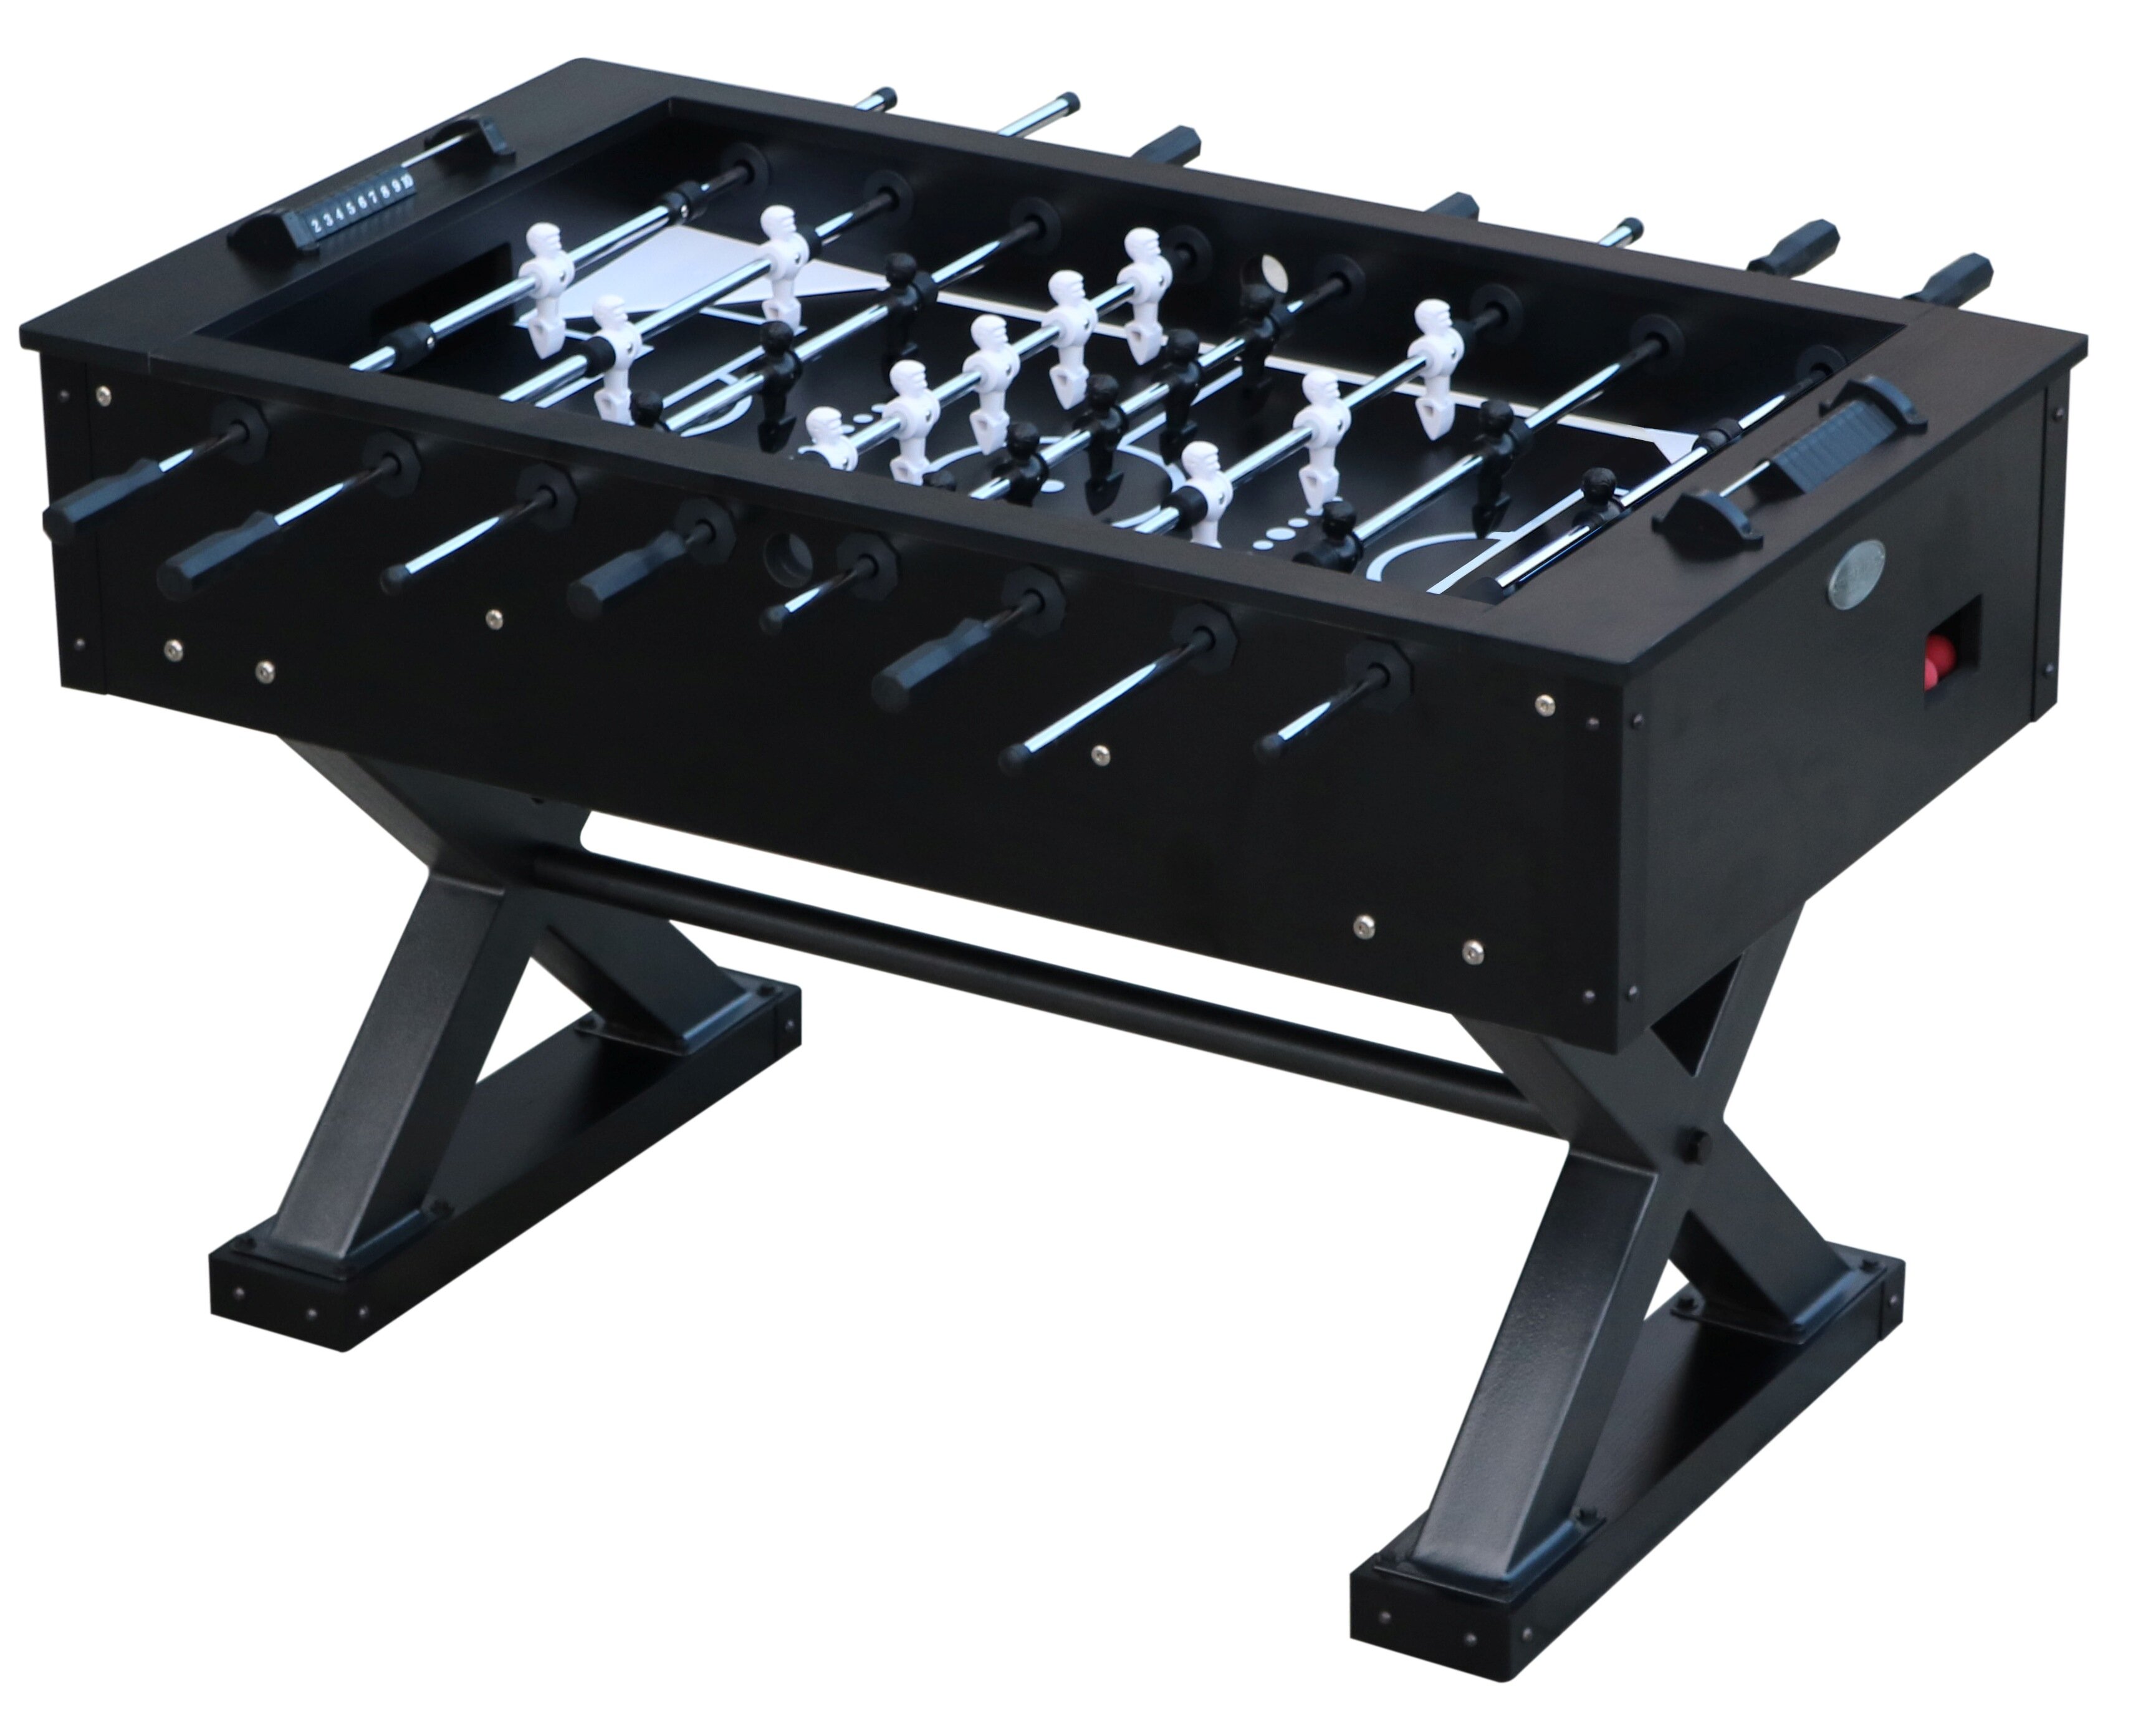 43+ Foosball Table Size Requirements Images